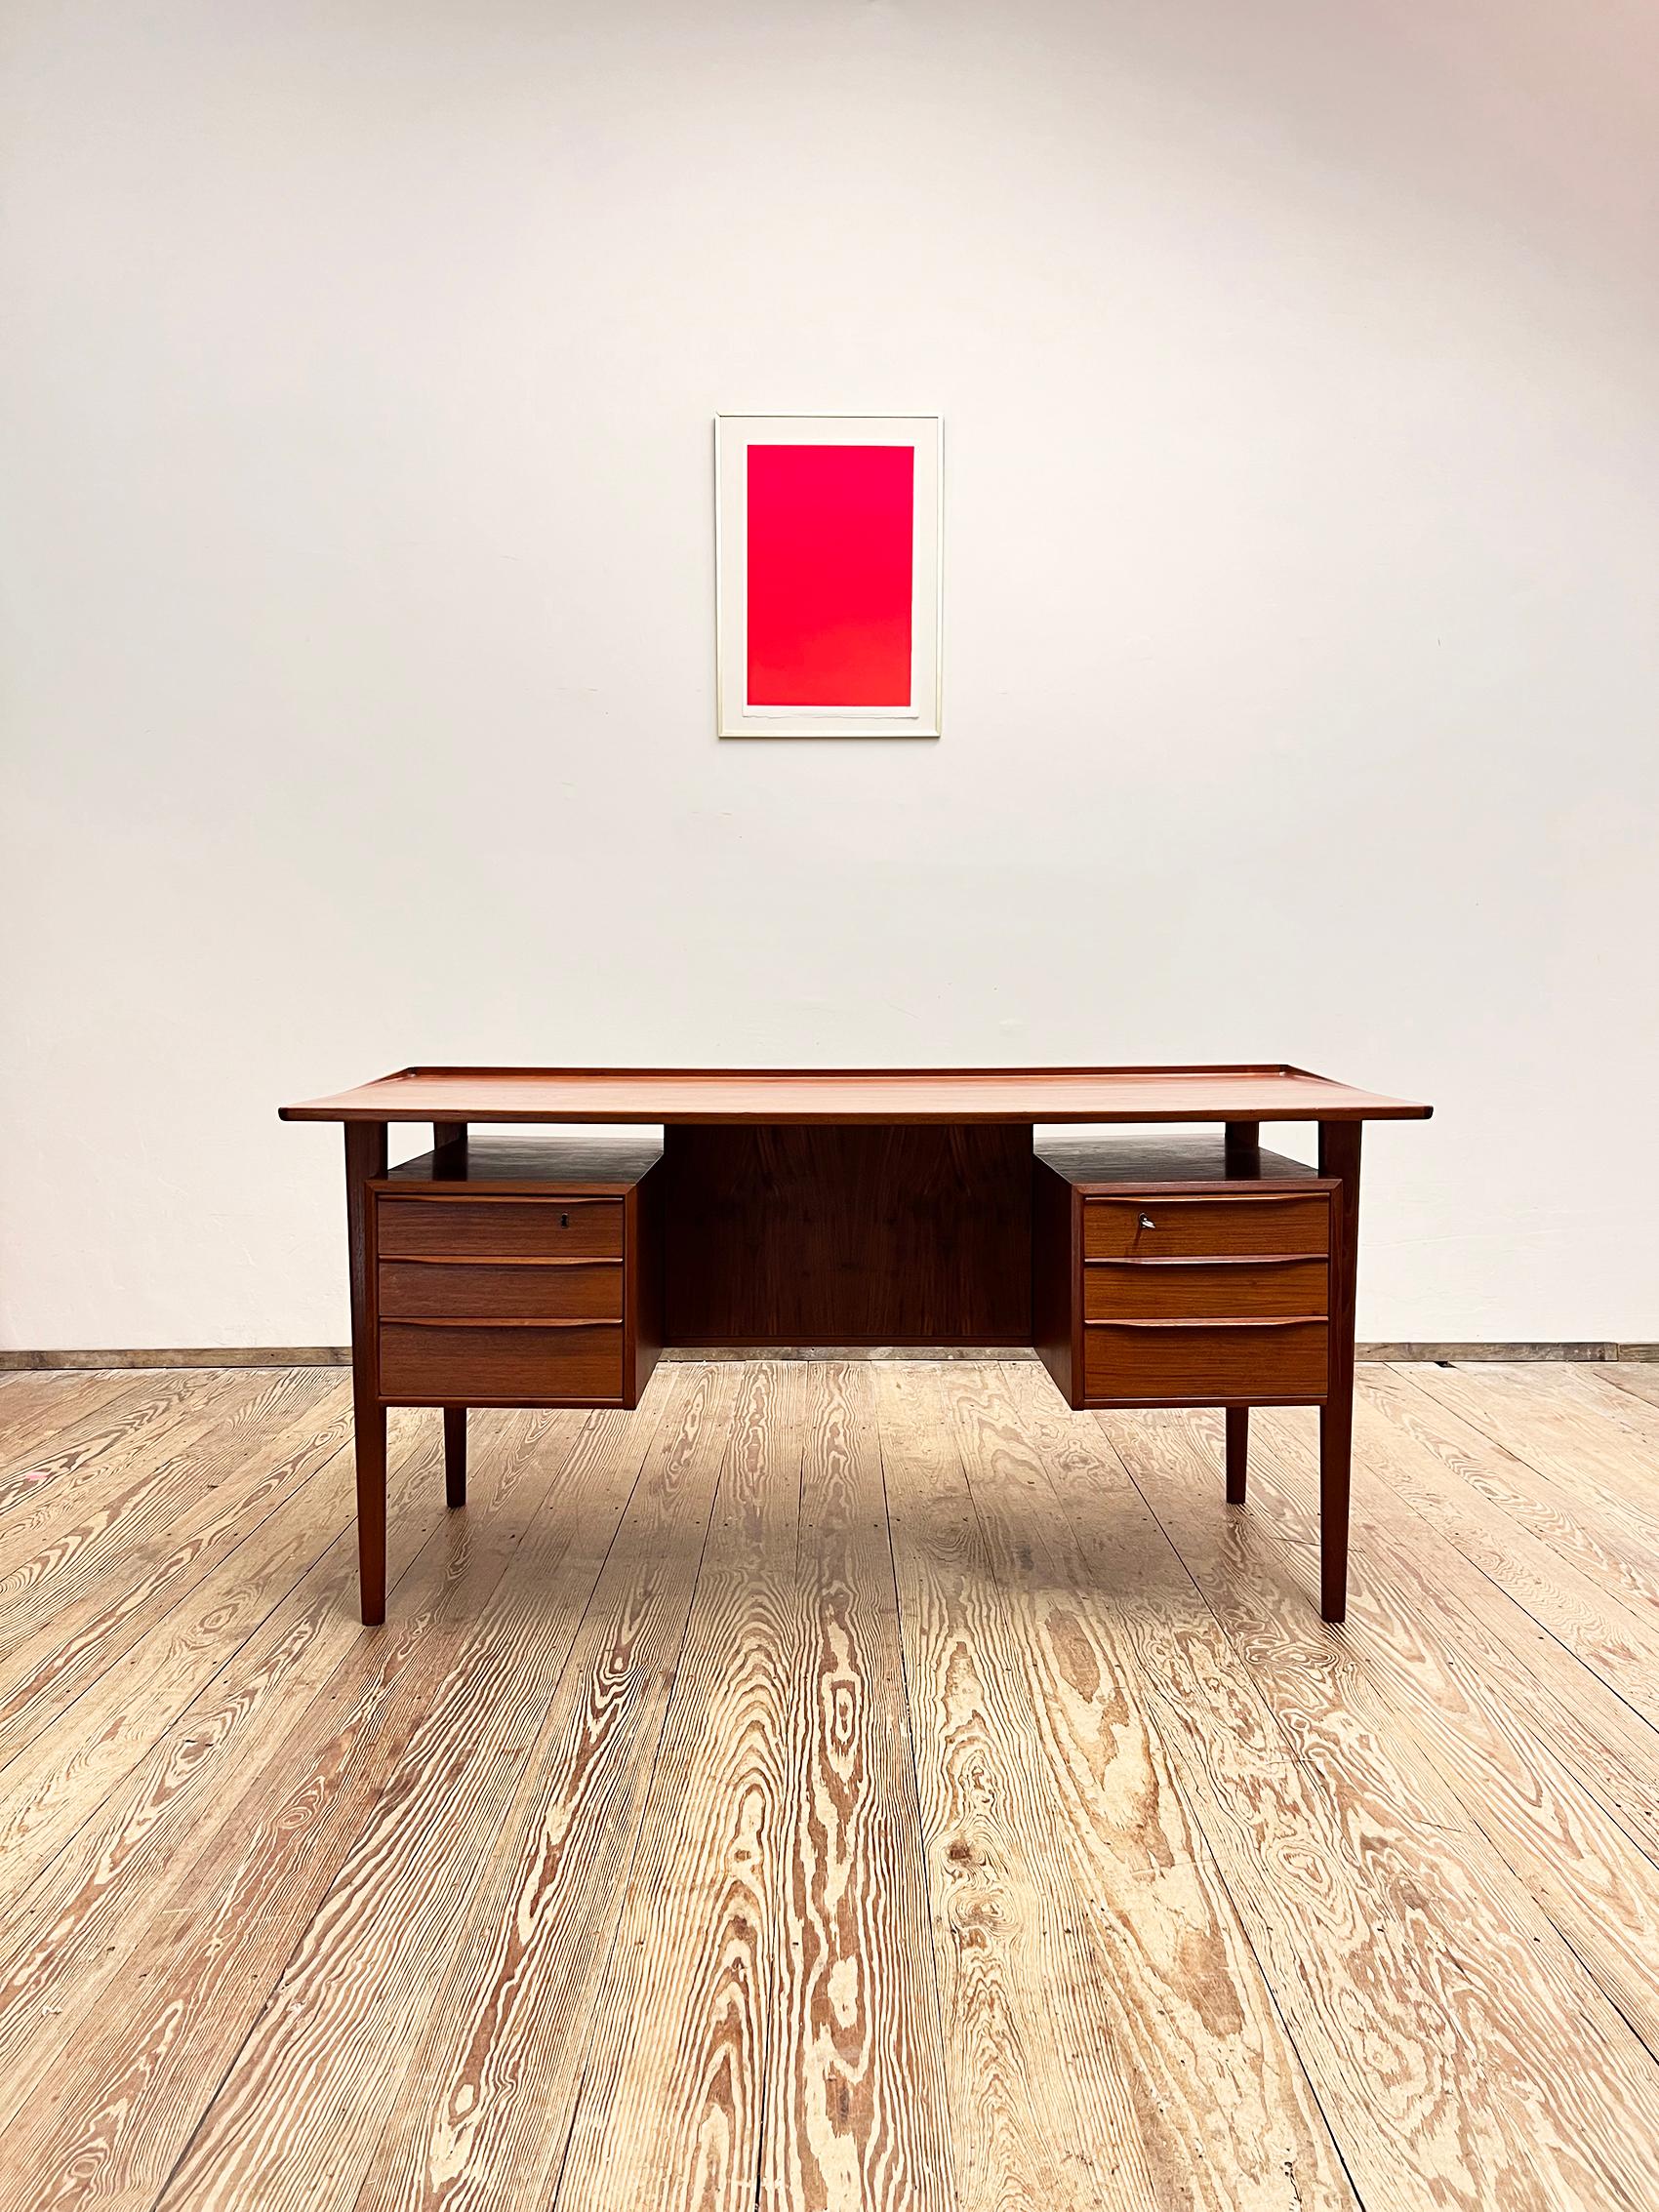 Dimensions 74 cm x 155 cm x 70 cm (Depth x Width x Height)


This free standing midcentury danish writing desk was designed by Peter Løvig Nielsen, produced by Hedensted Møbelfabrik Denmark in 1968. The table is made of teak wood and features two